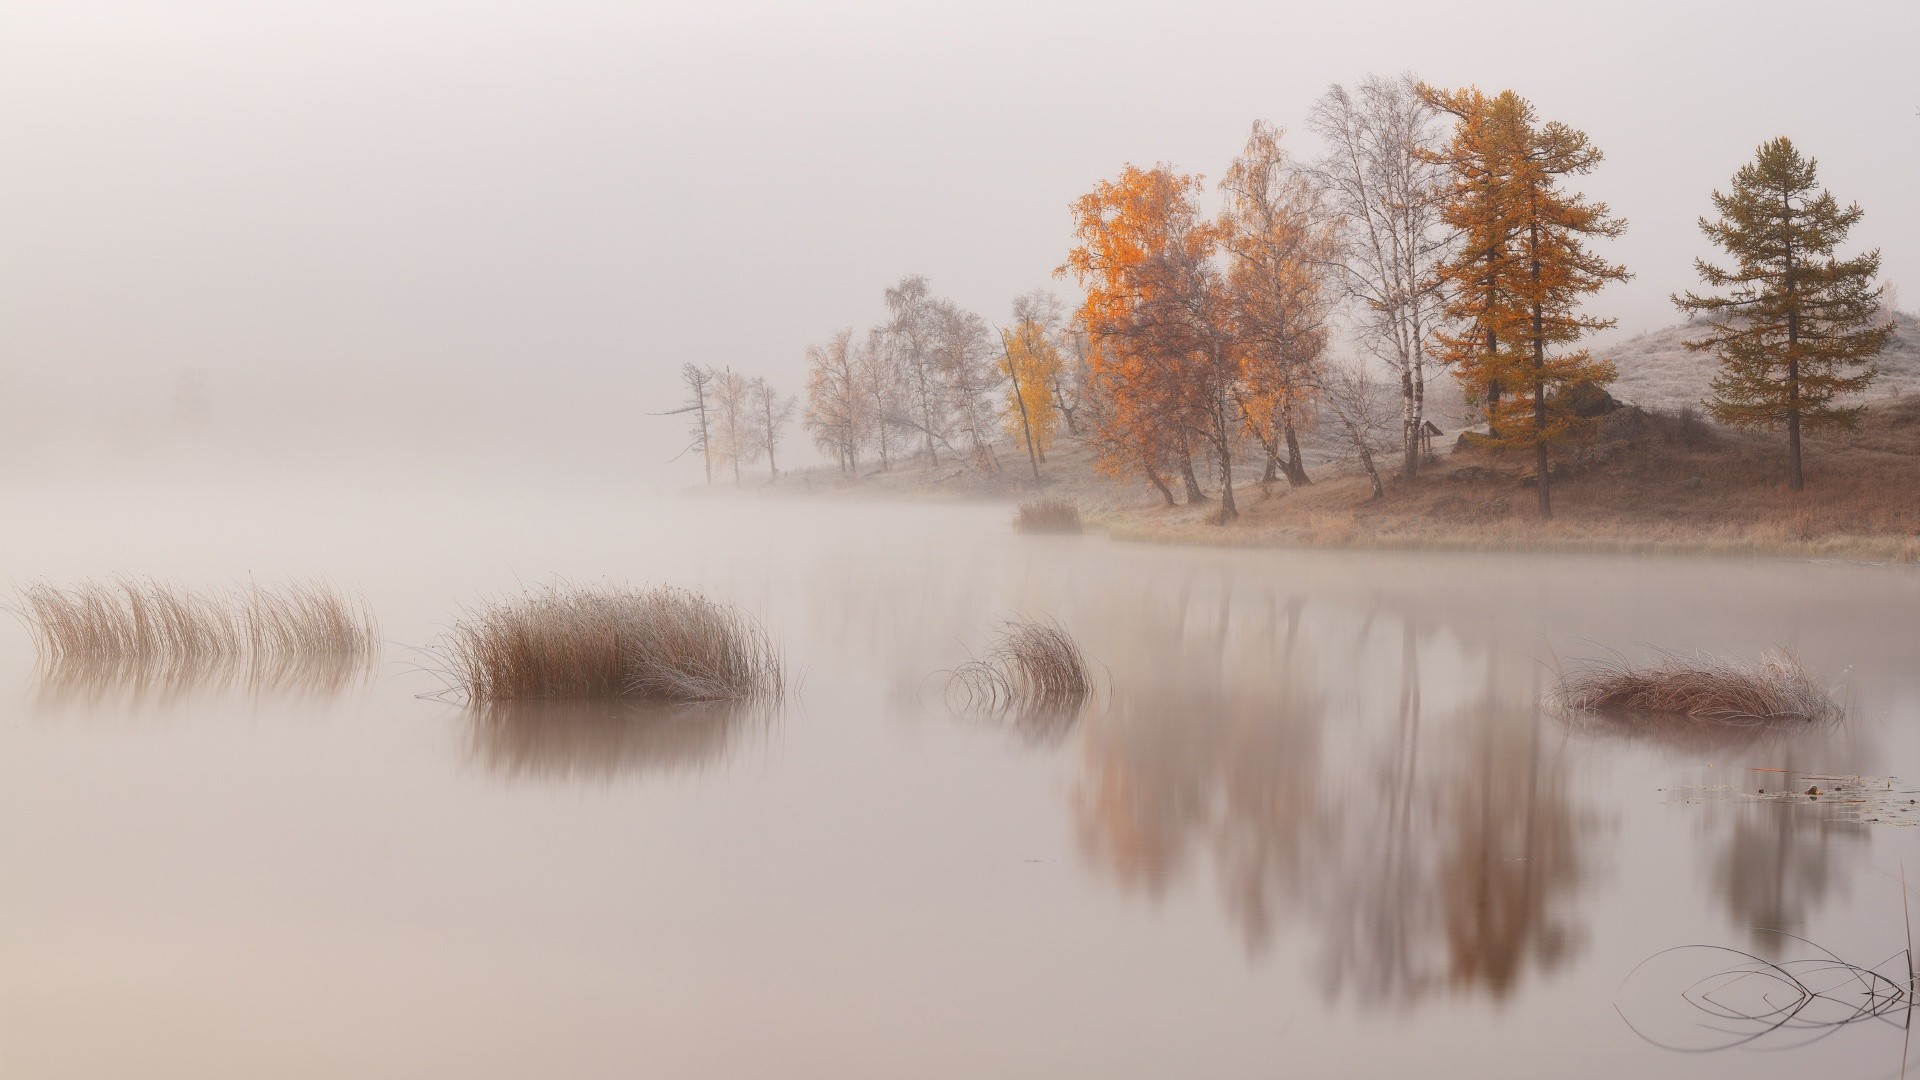 General 1920x1080 nature landscape trees water lake mist morning fall reflection hills calm